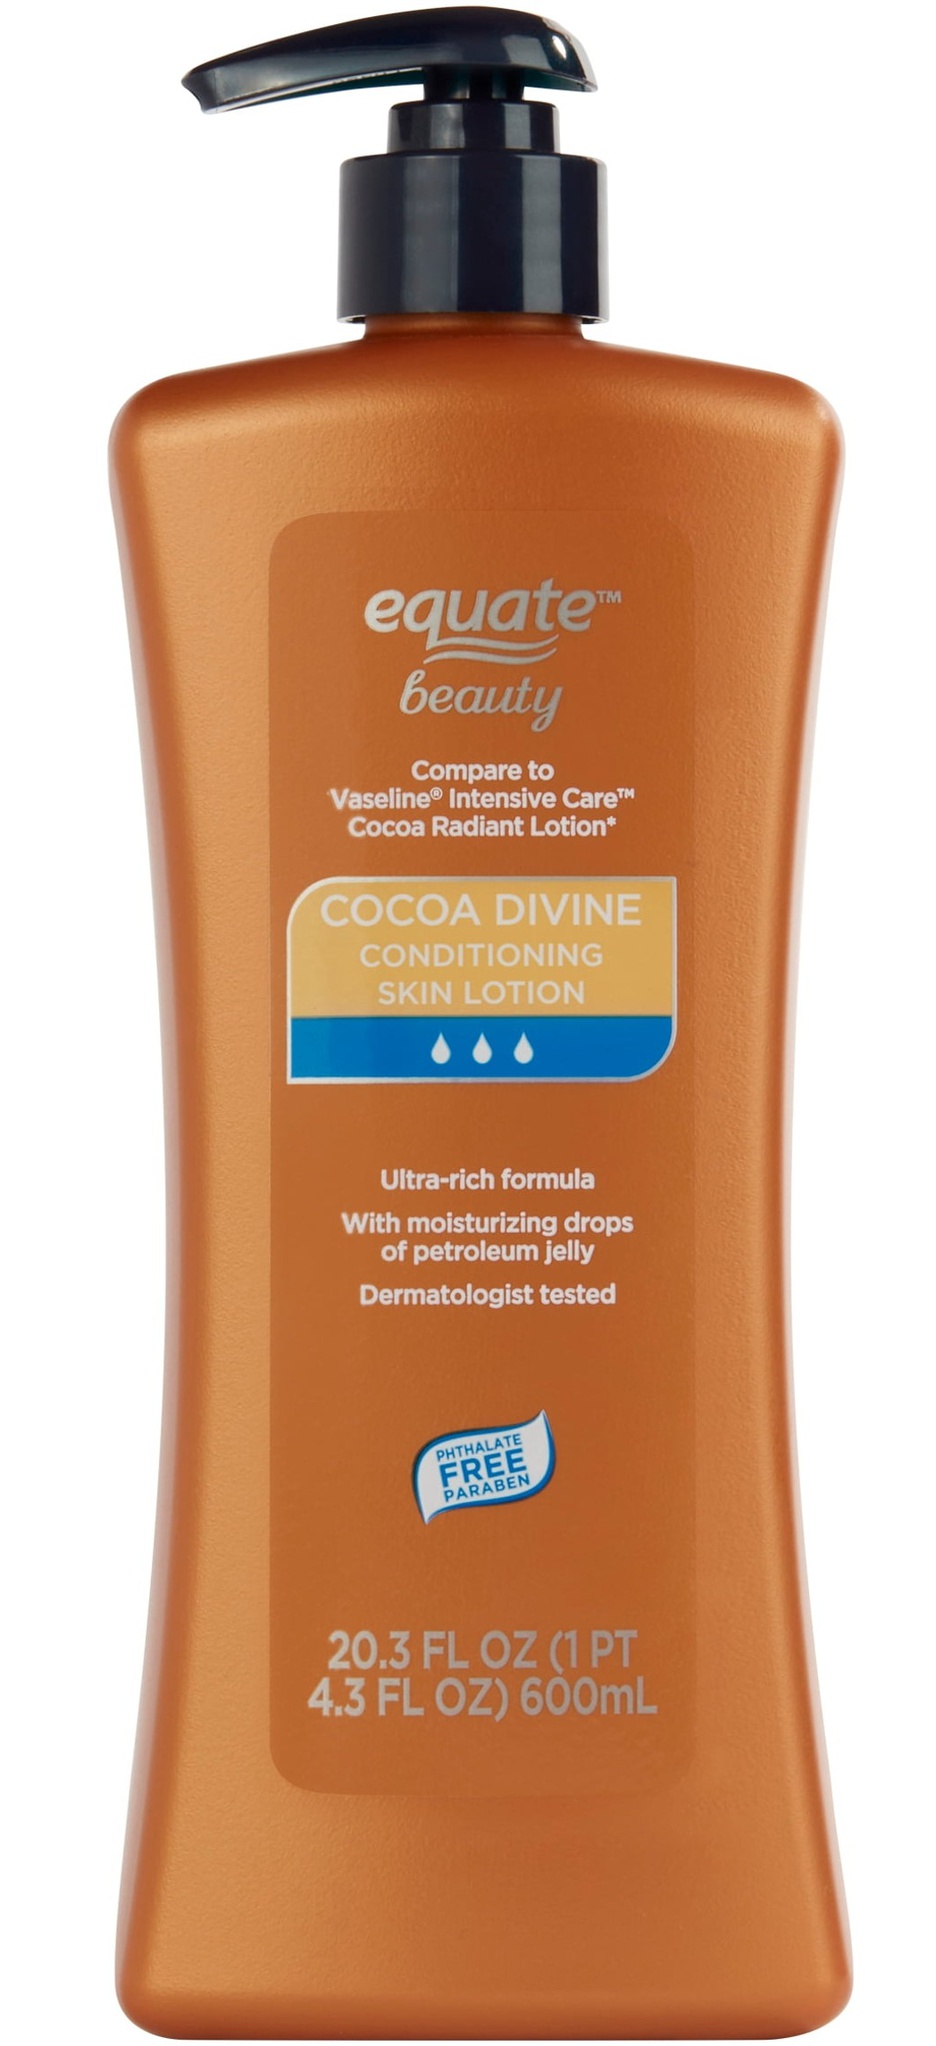 Equate Beauty Cocoa Butter Conditioning Skin Lotion